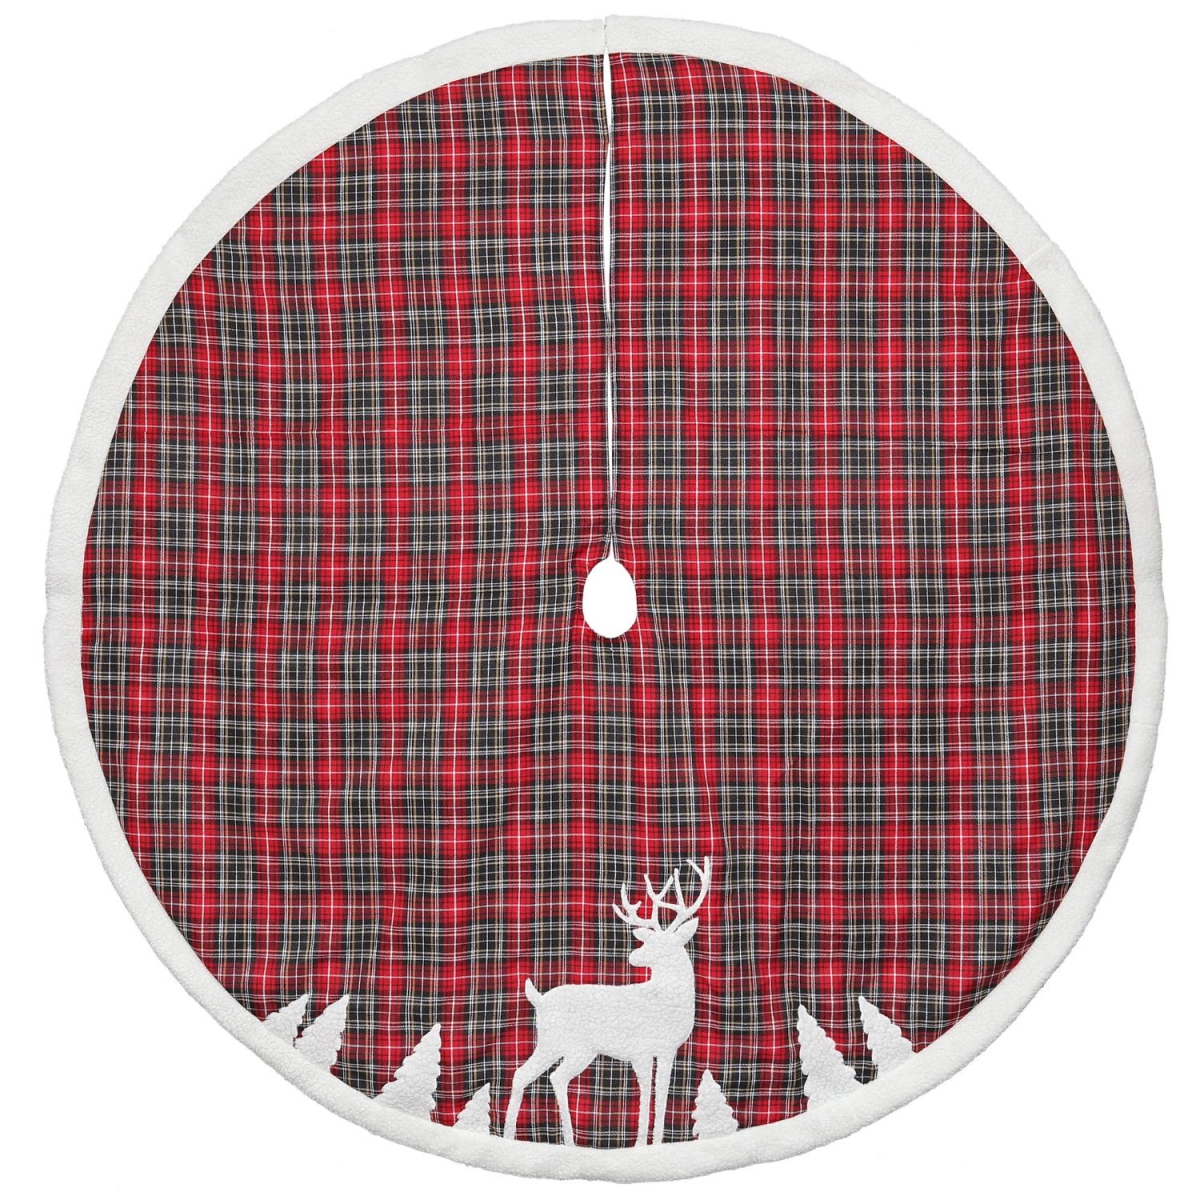 Picture of Dyno 32637383 48 in. Plaid Tree Skirt with Deer Applique - Red